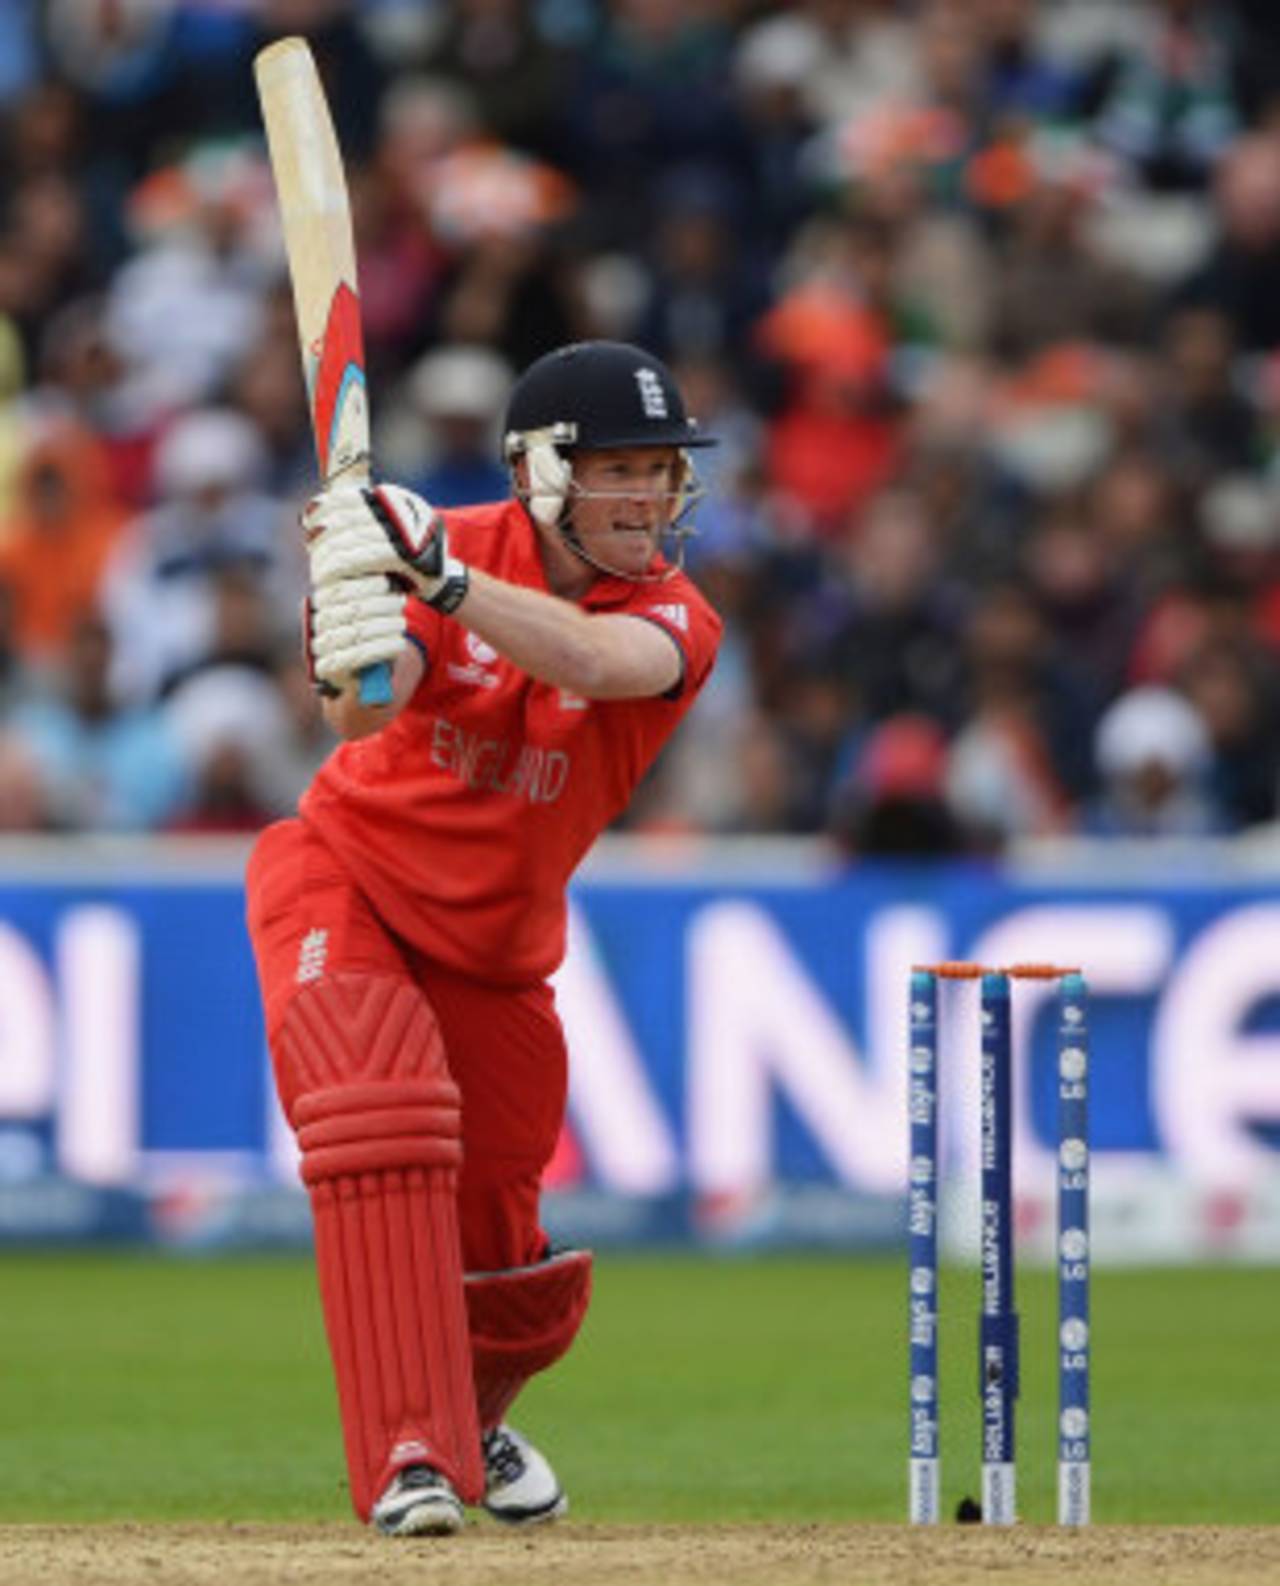 Eoin Morgan has already scored as many ODI hundreds as any other England batsman from the No. 5 slot or lower in ODIs&nbsp;&nbsp;&bull;&nbsp;&nbsp;Getty Images